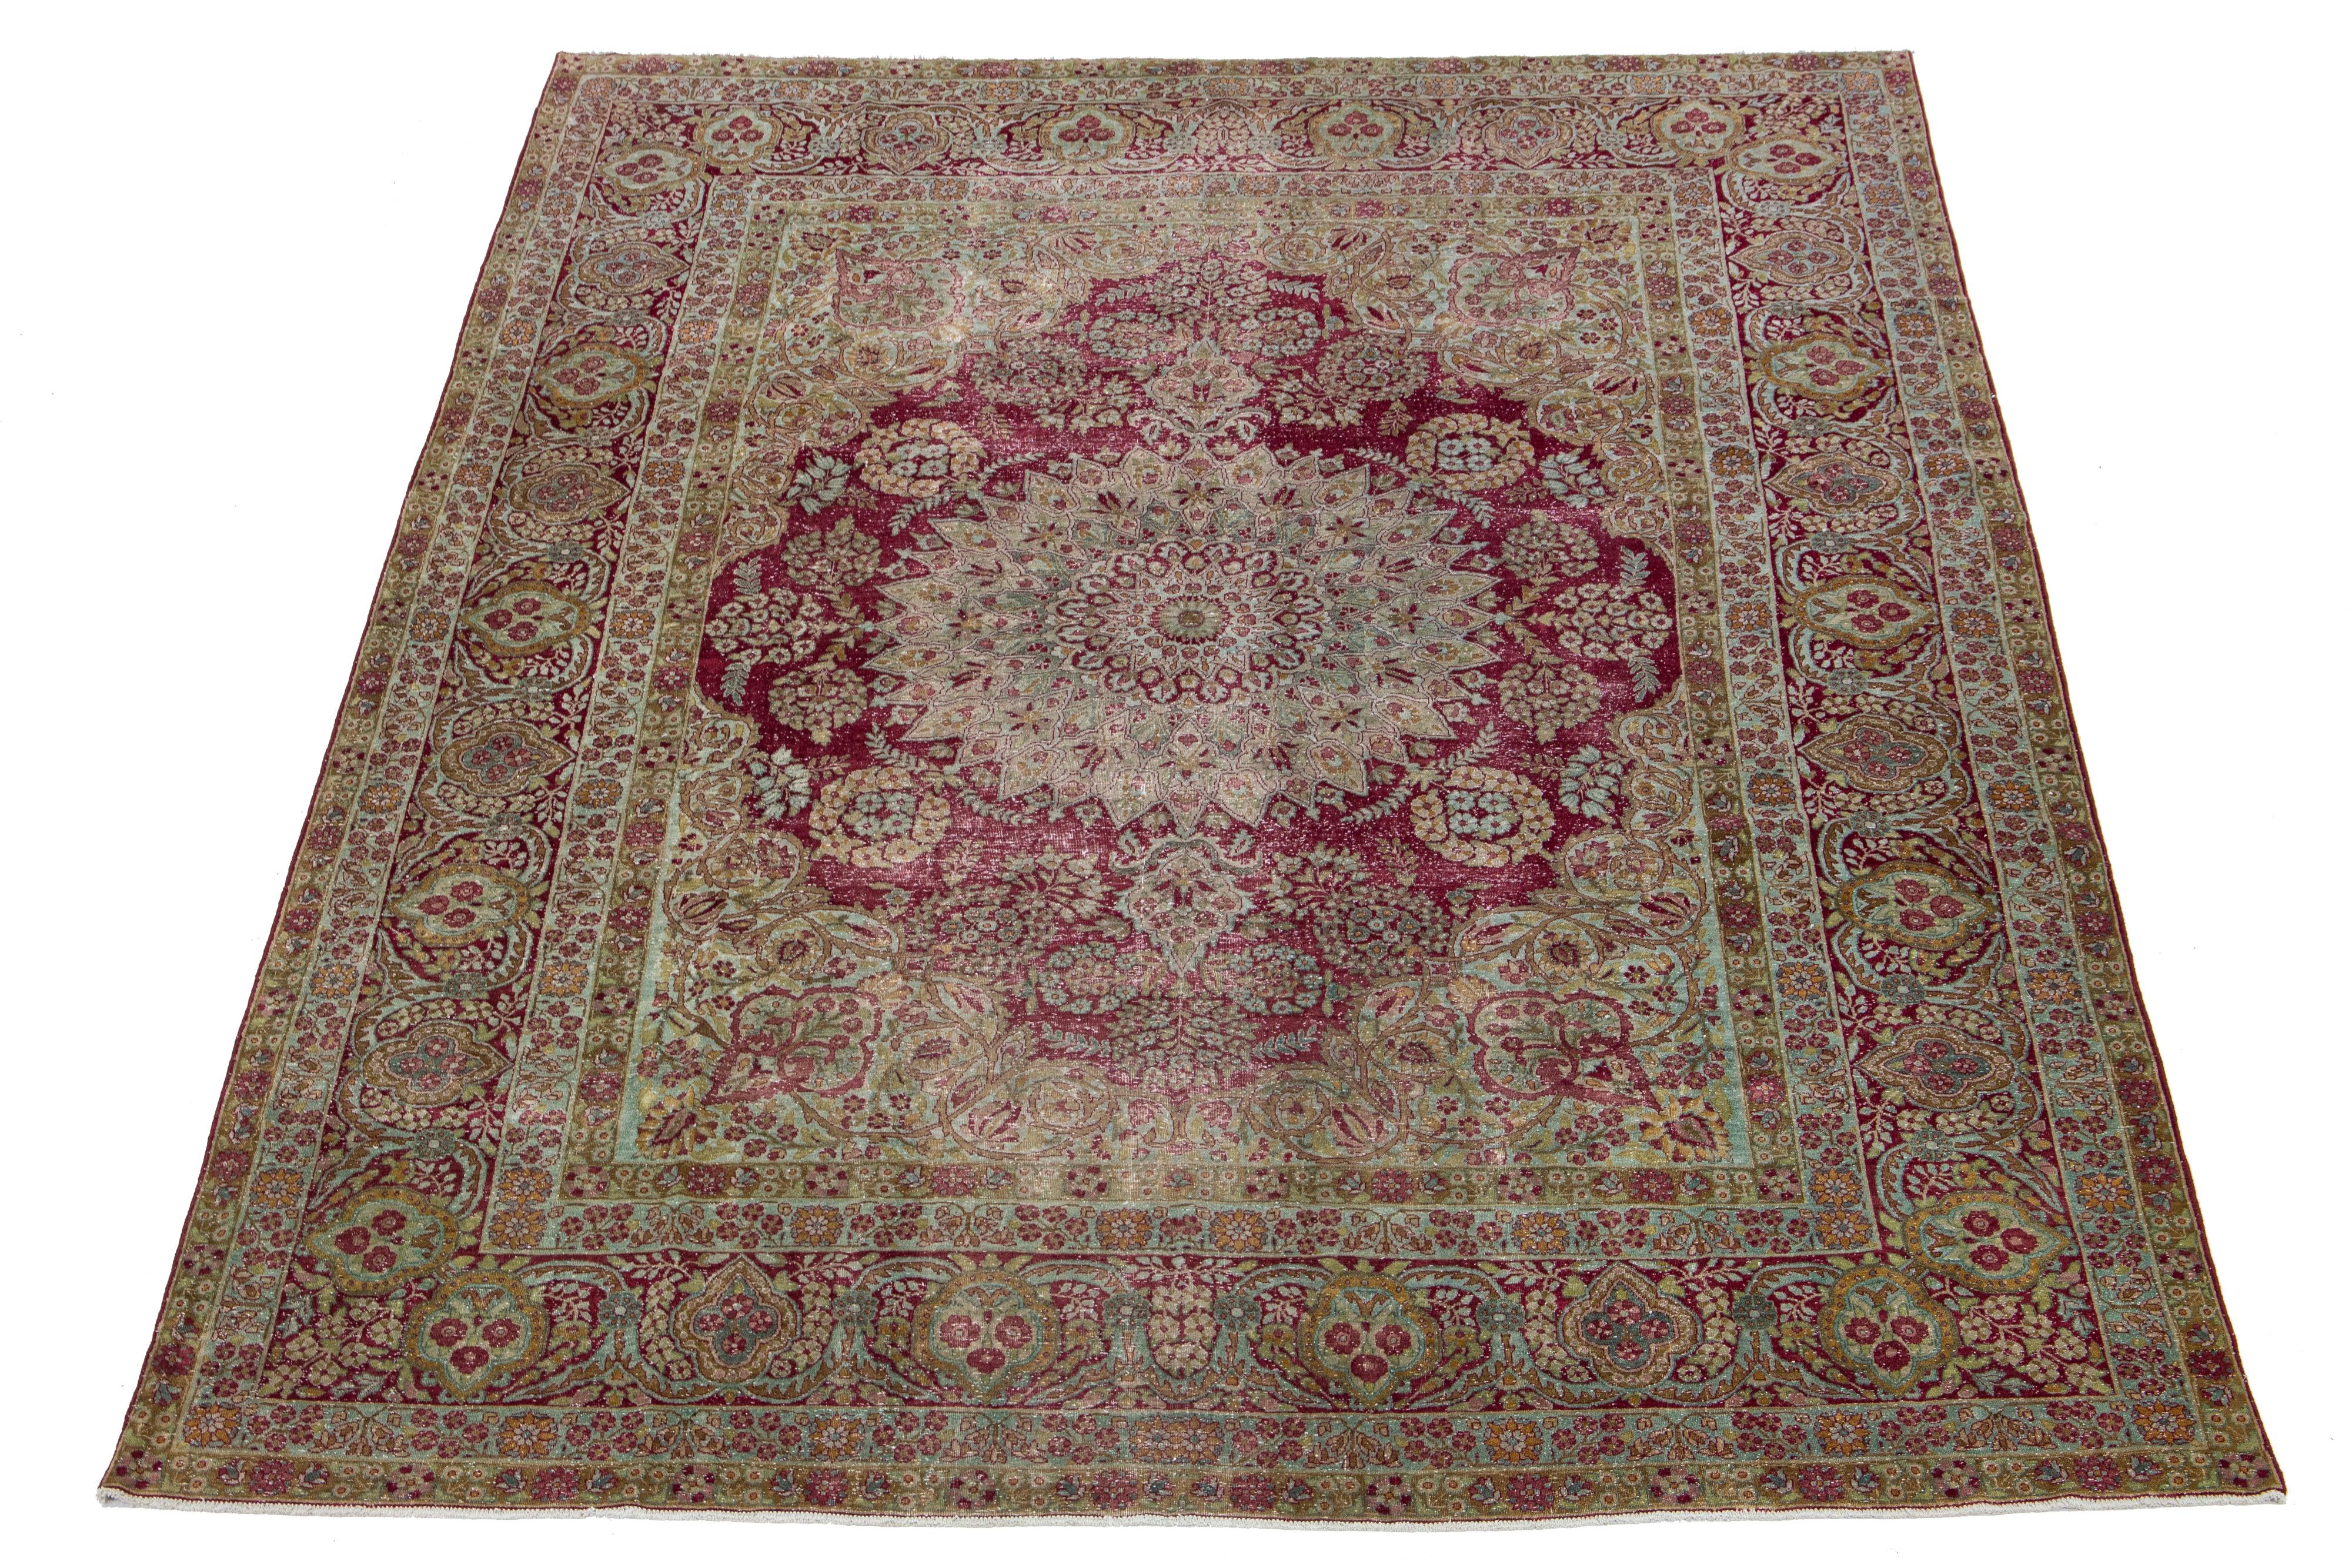 This Persian Kerman wool rug from the early 1900s showcases a meticulously crafted allover floral design in blue and goldenrod. This antique rug features a raspberry red field.

This rug measures 9'8